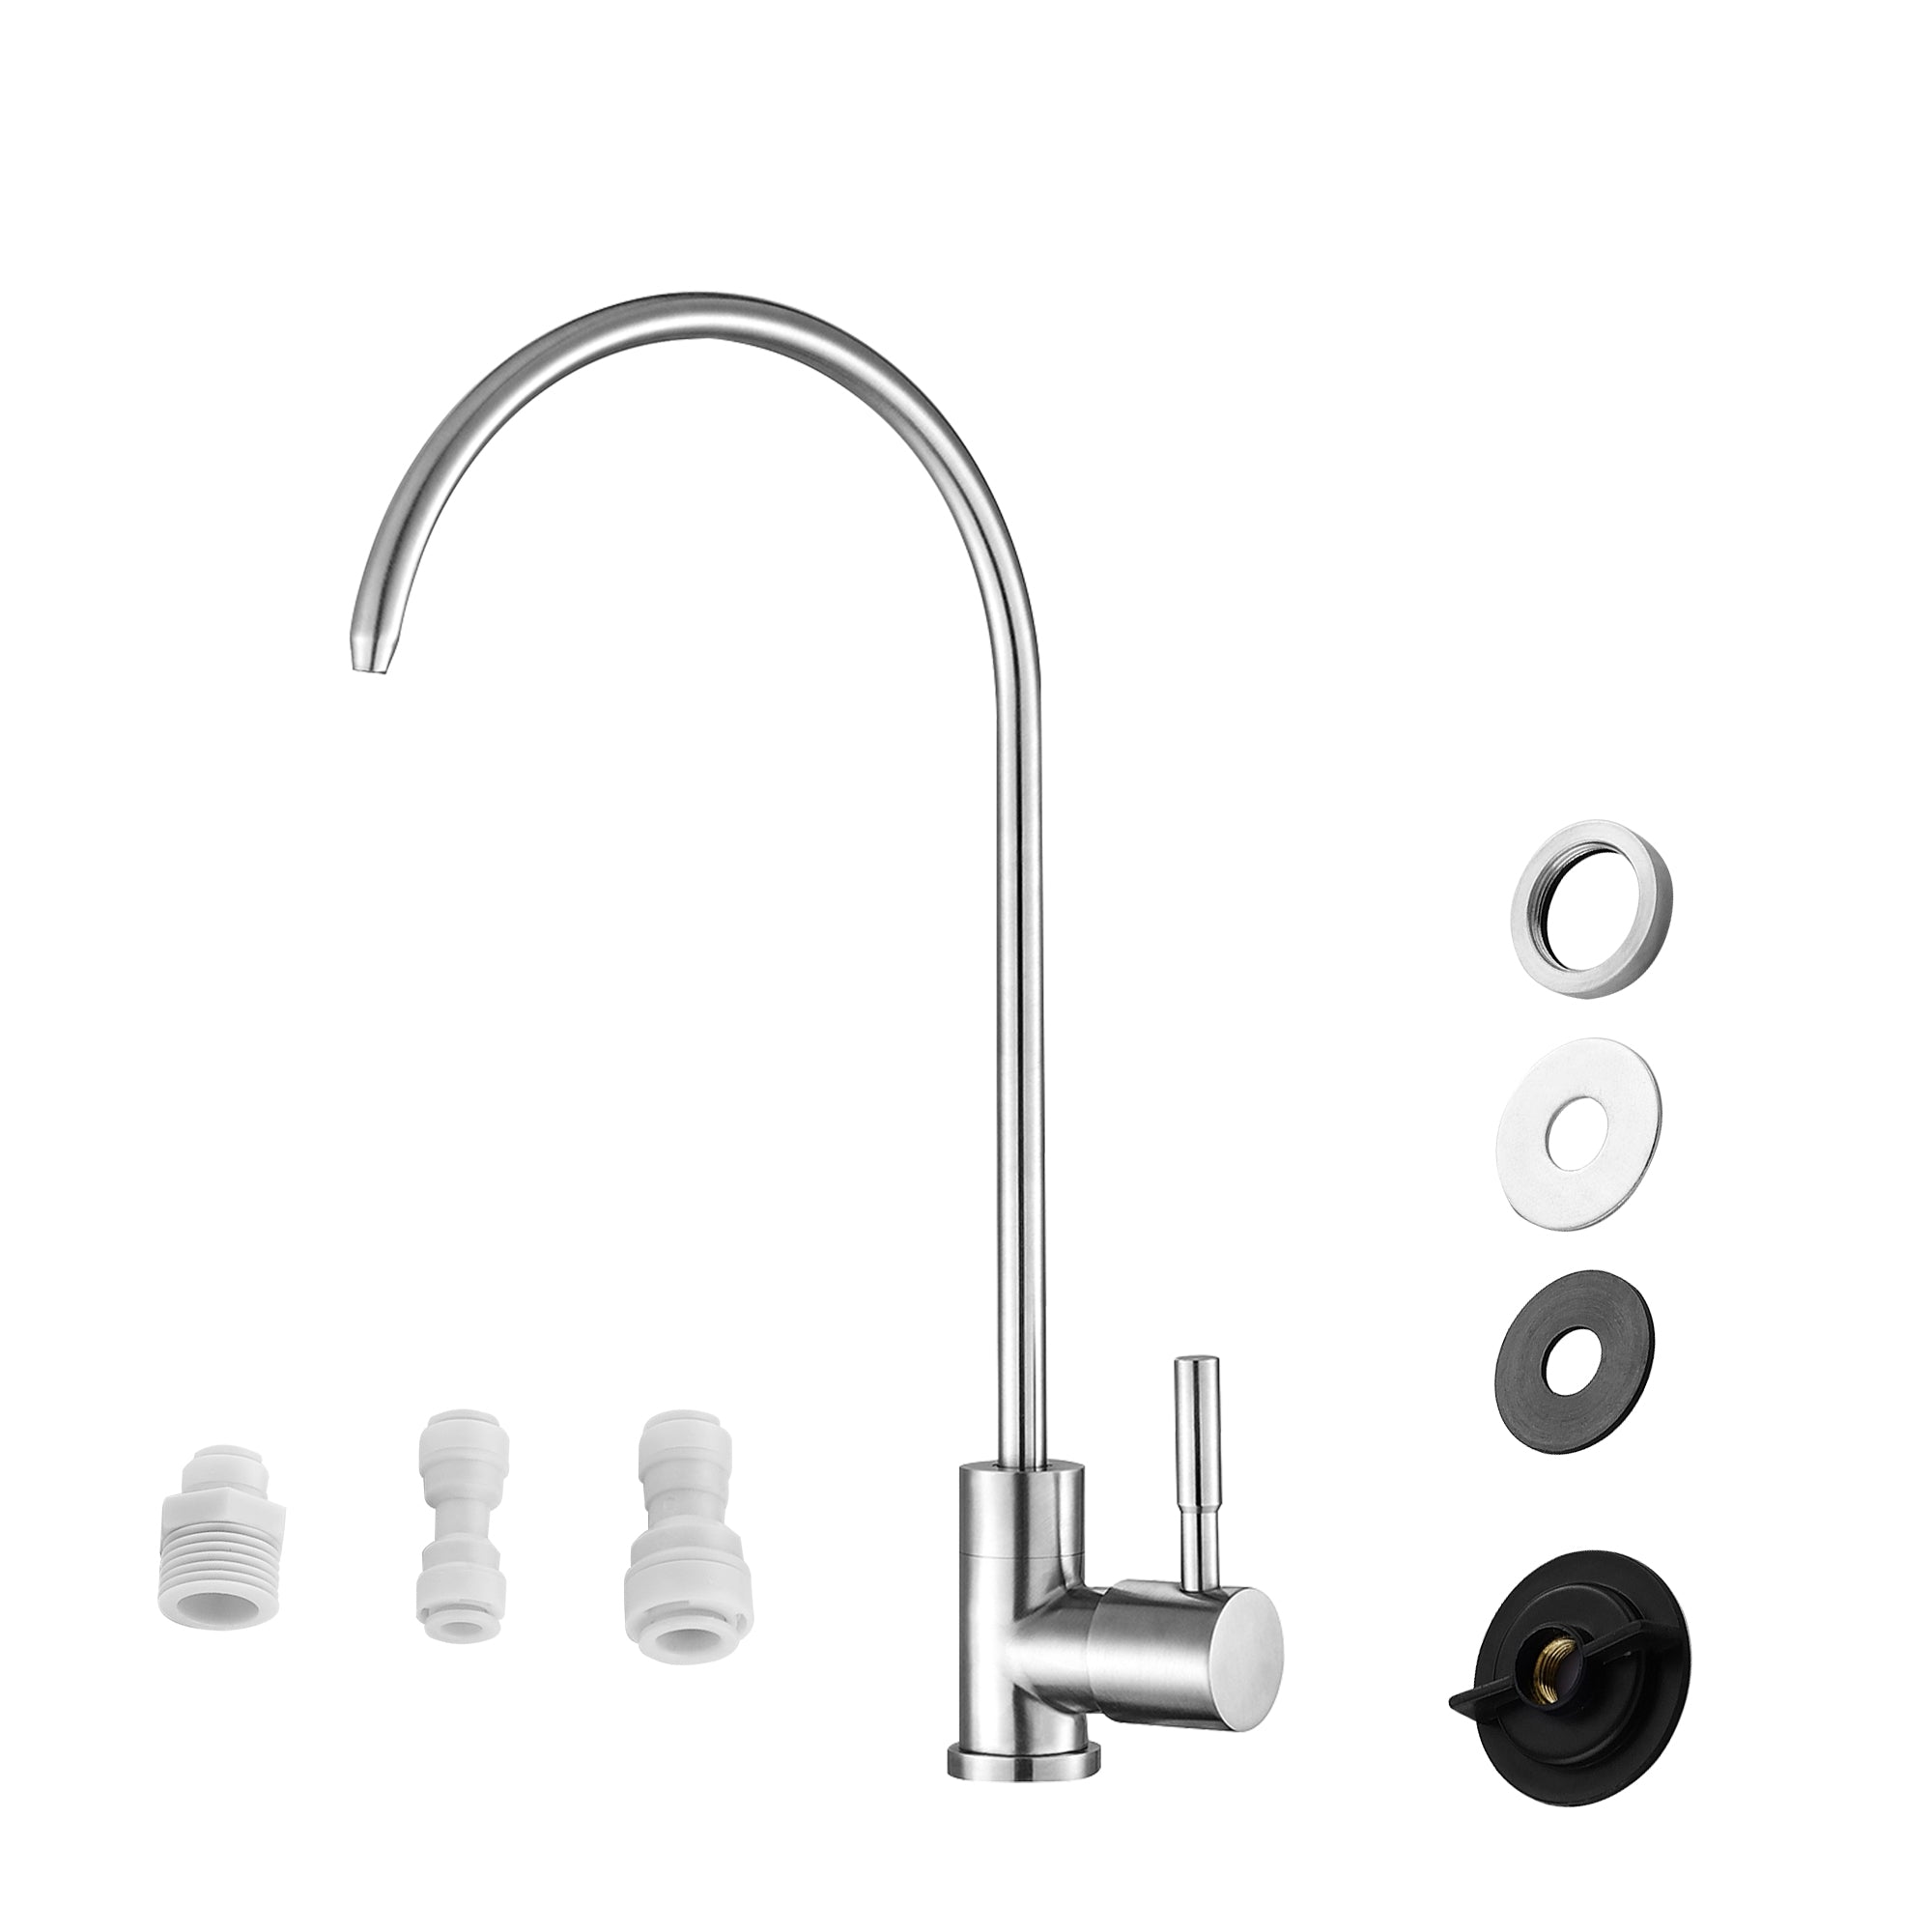 Water Kitchen Faucet Booster Filter 360 Degree Stainless Steel for Reverse Osmosis System from Lordear